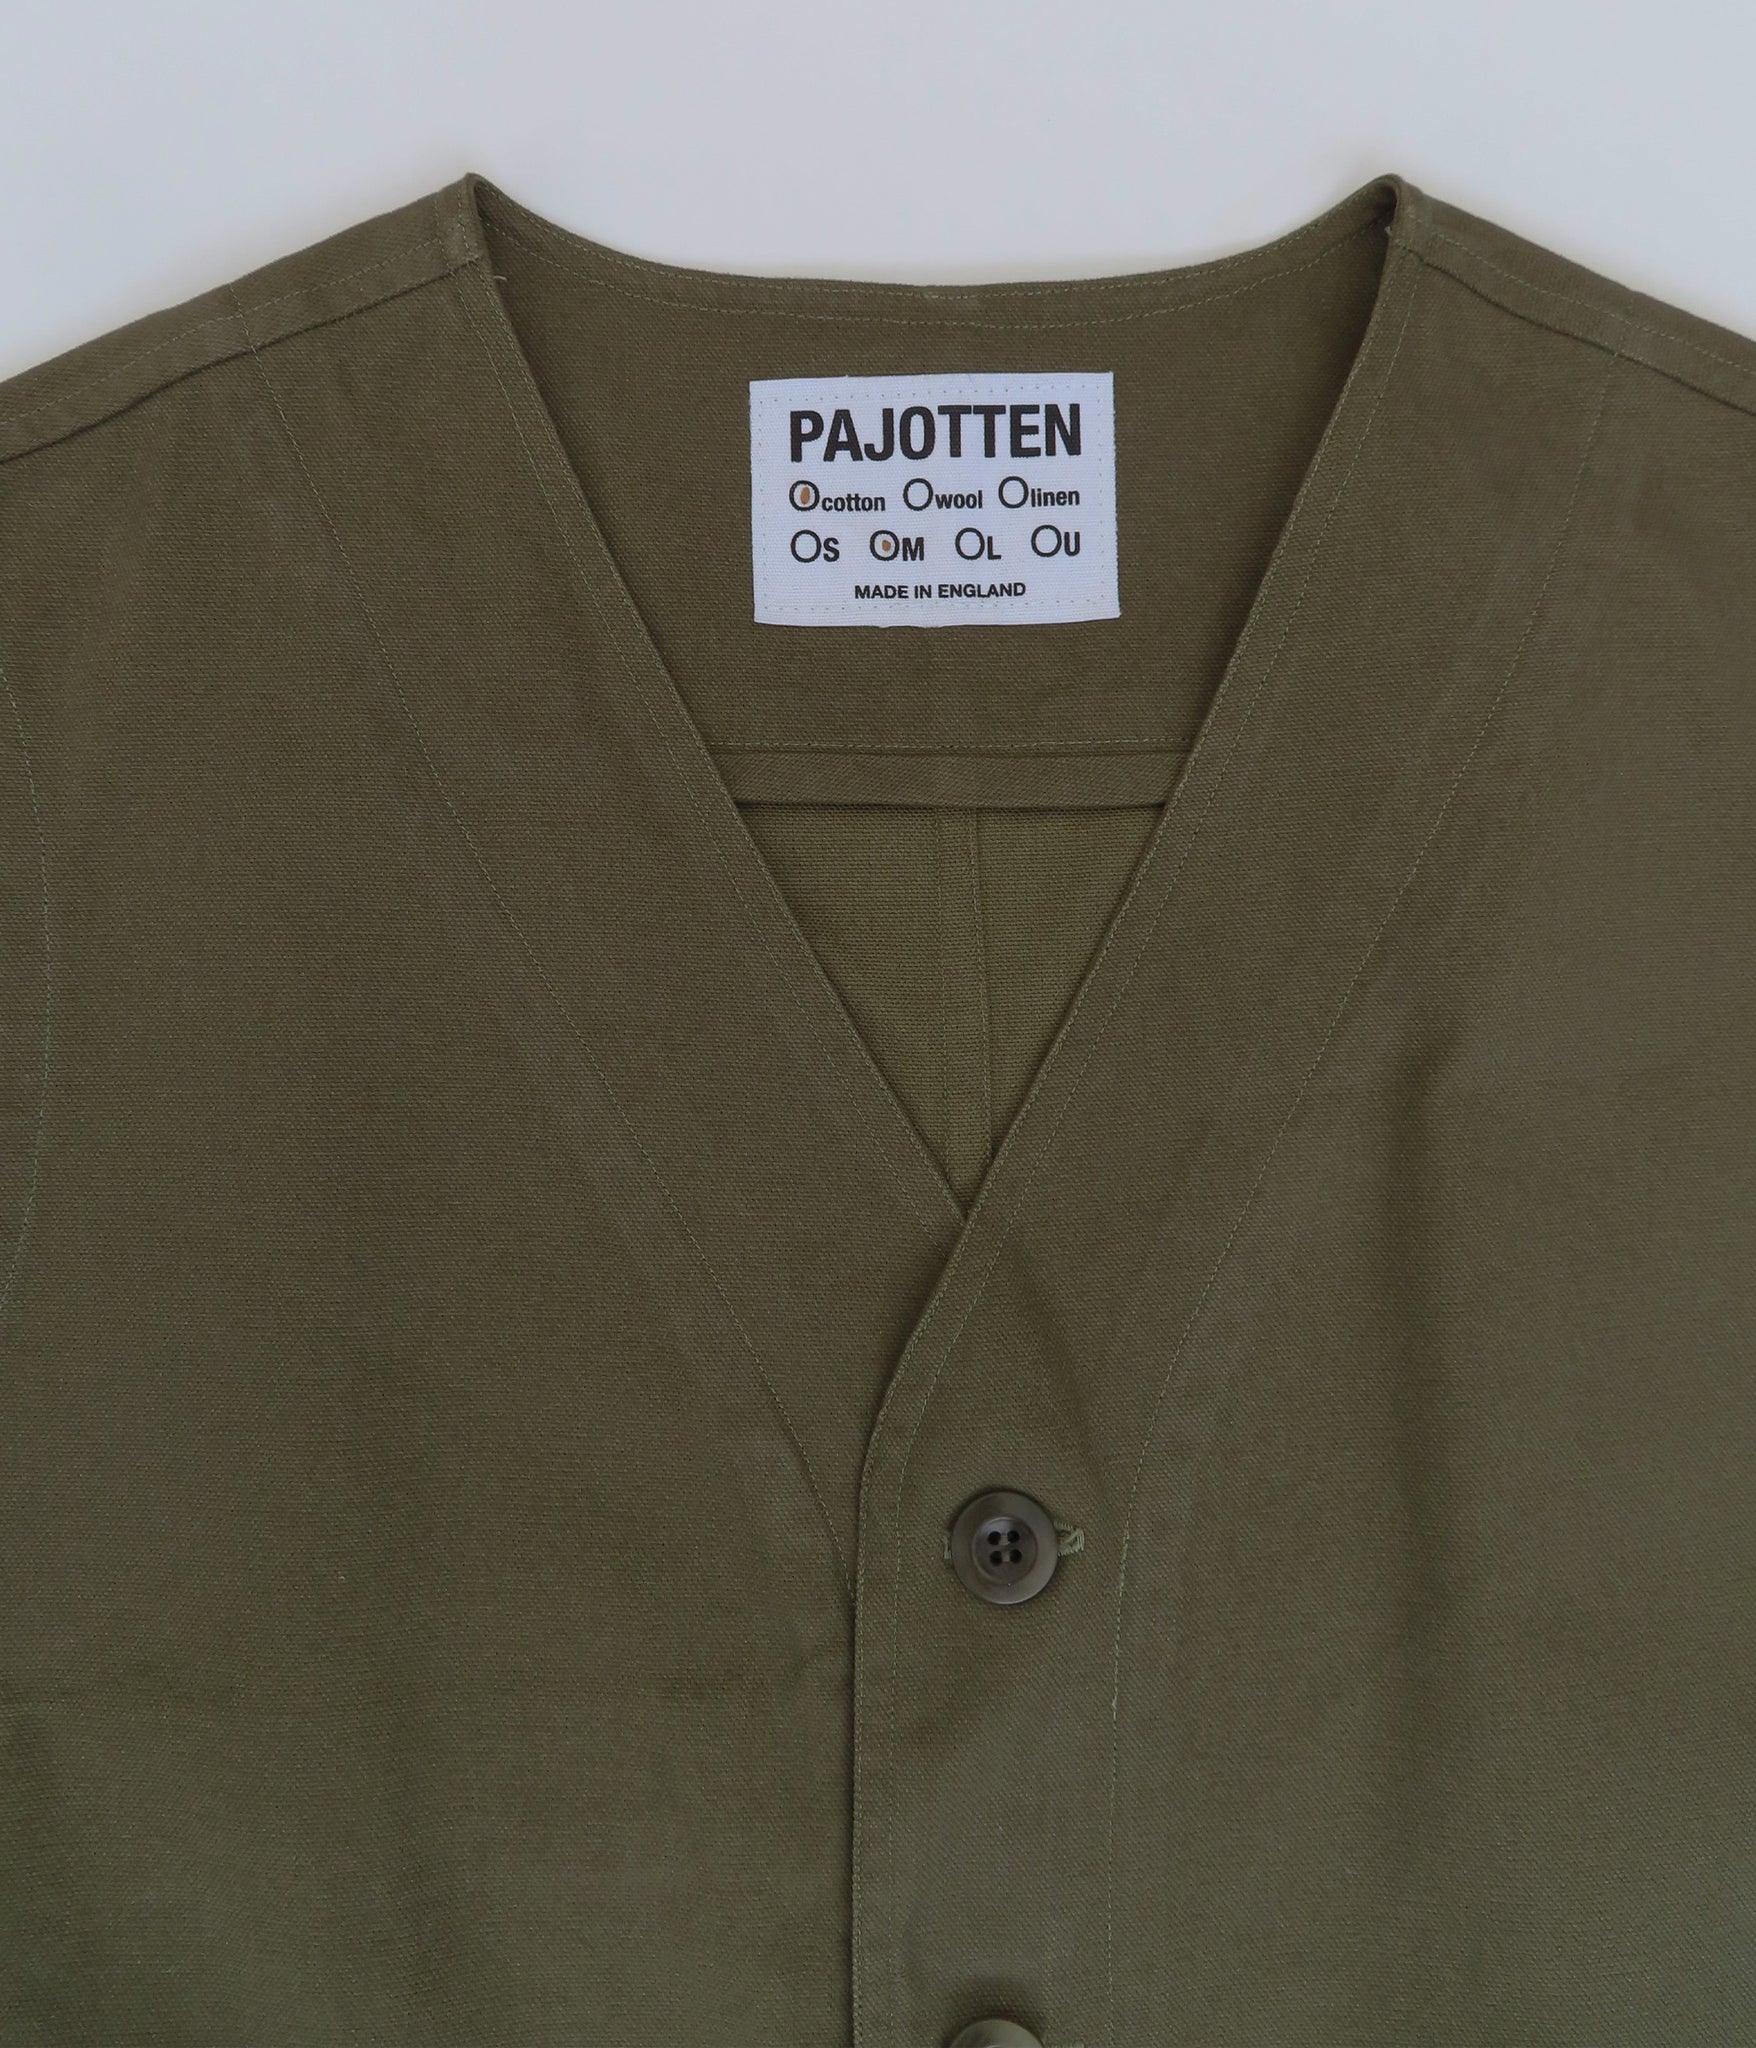 DETAIL OF THE GREEN COTTON WAISTCOAT SHOWING THE PAJOTTEN LABEL